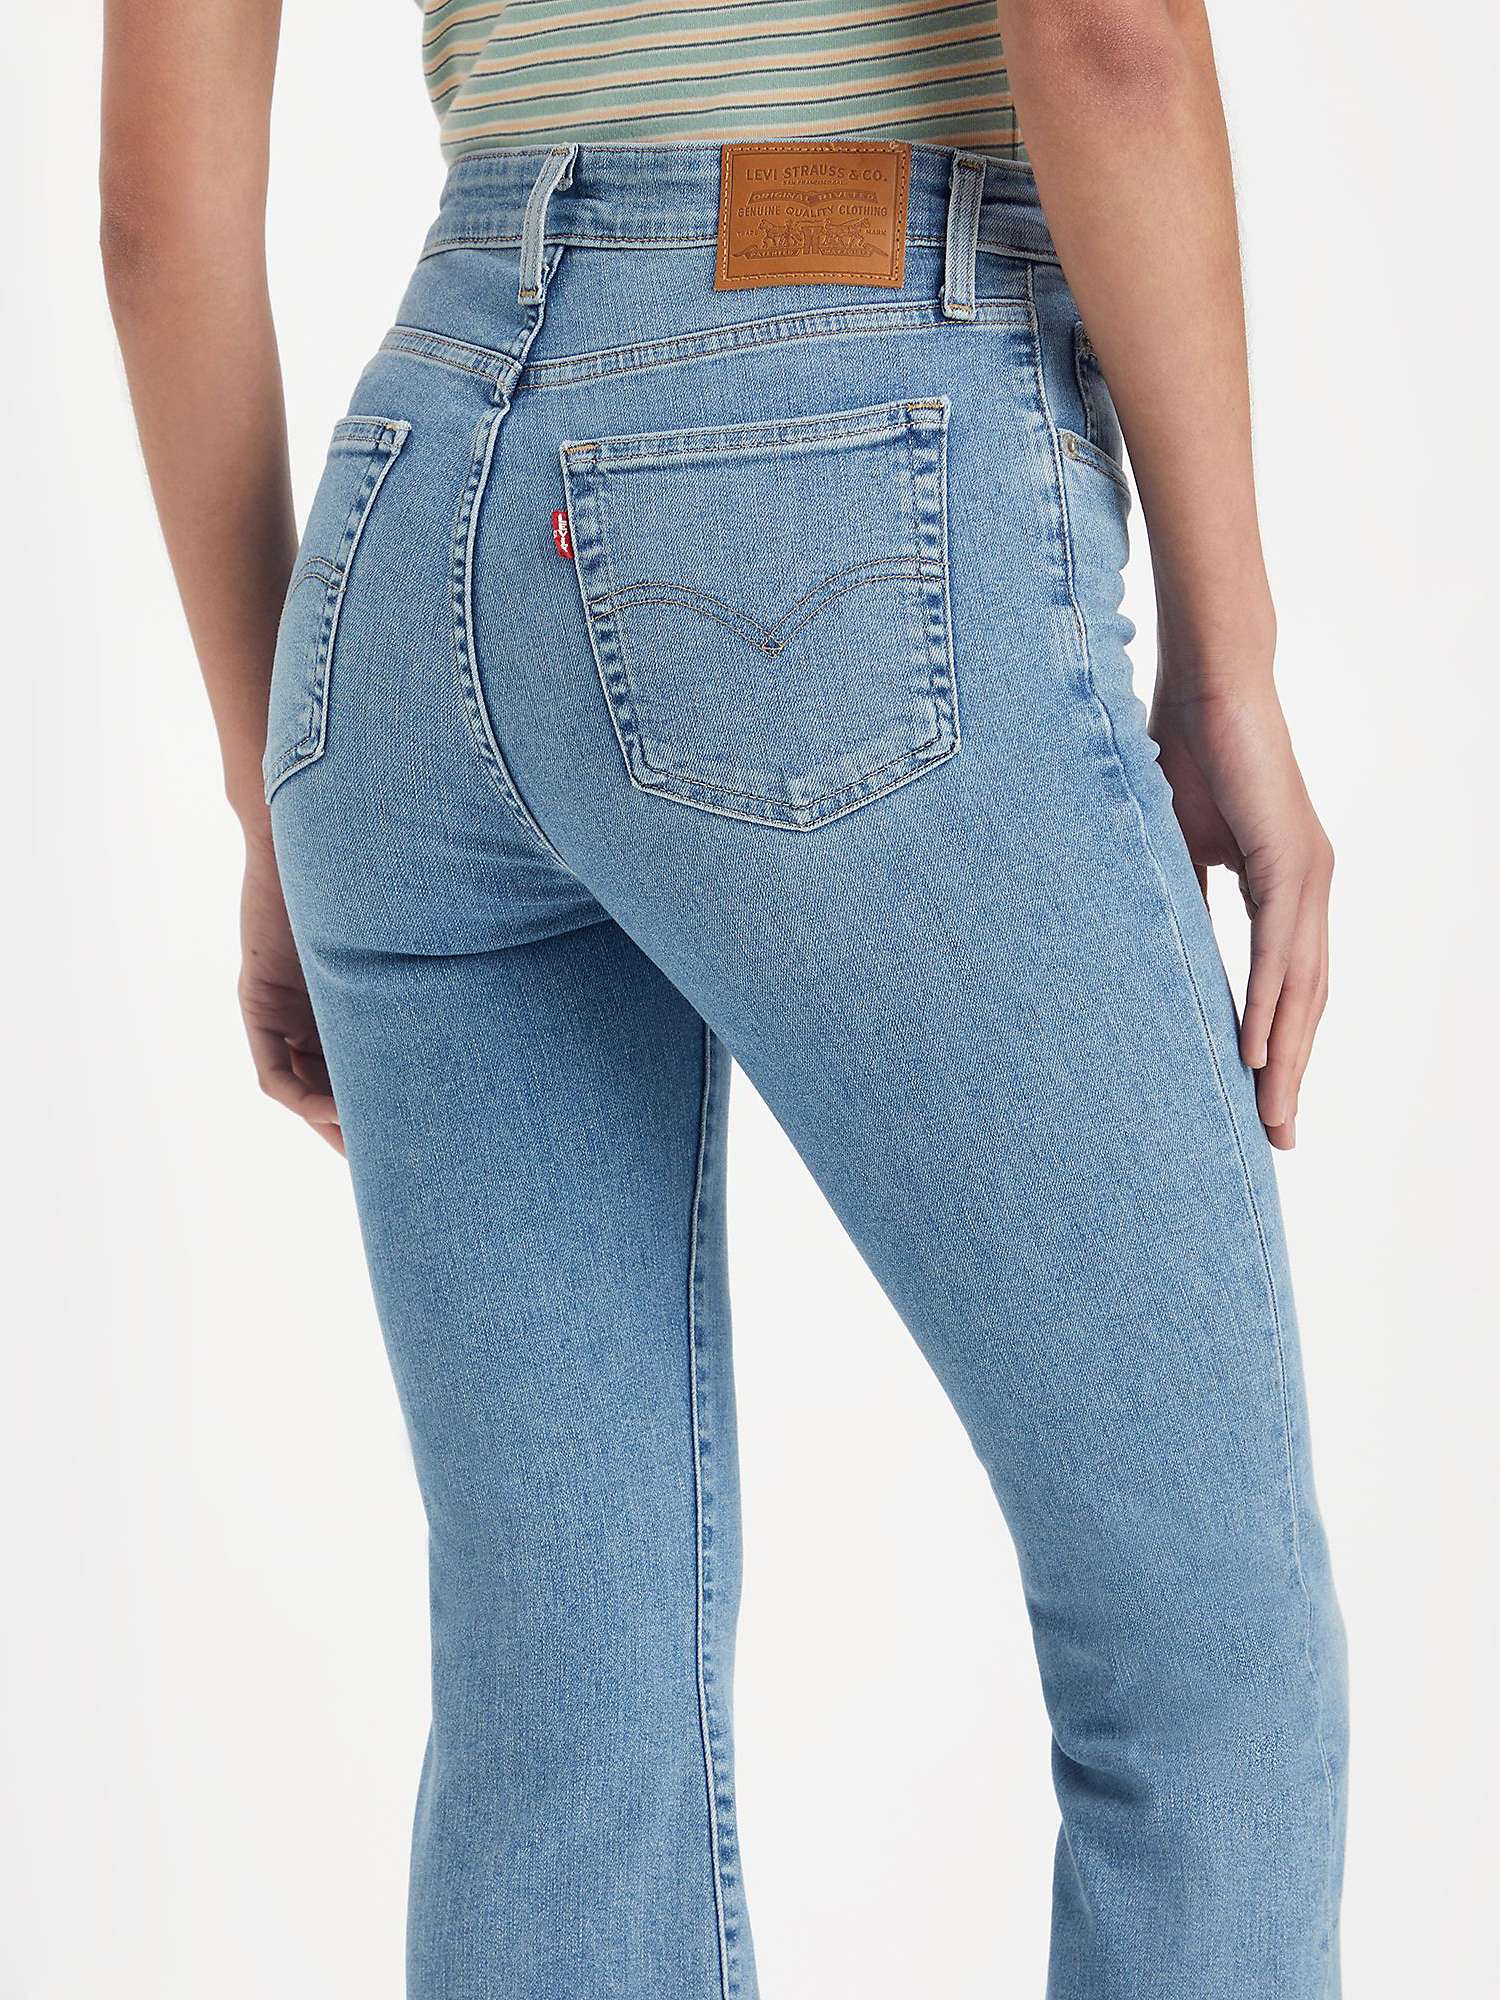 Buy Levi's 726 High Rise Flared Jeans Online at johnlewis.com